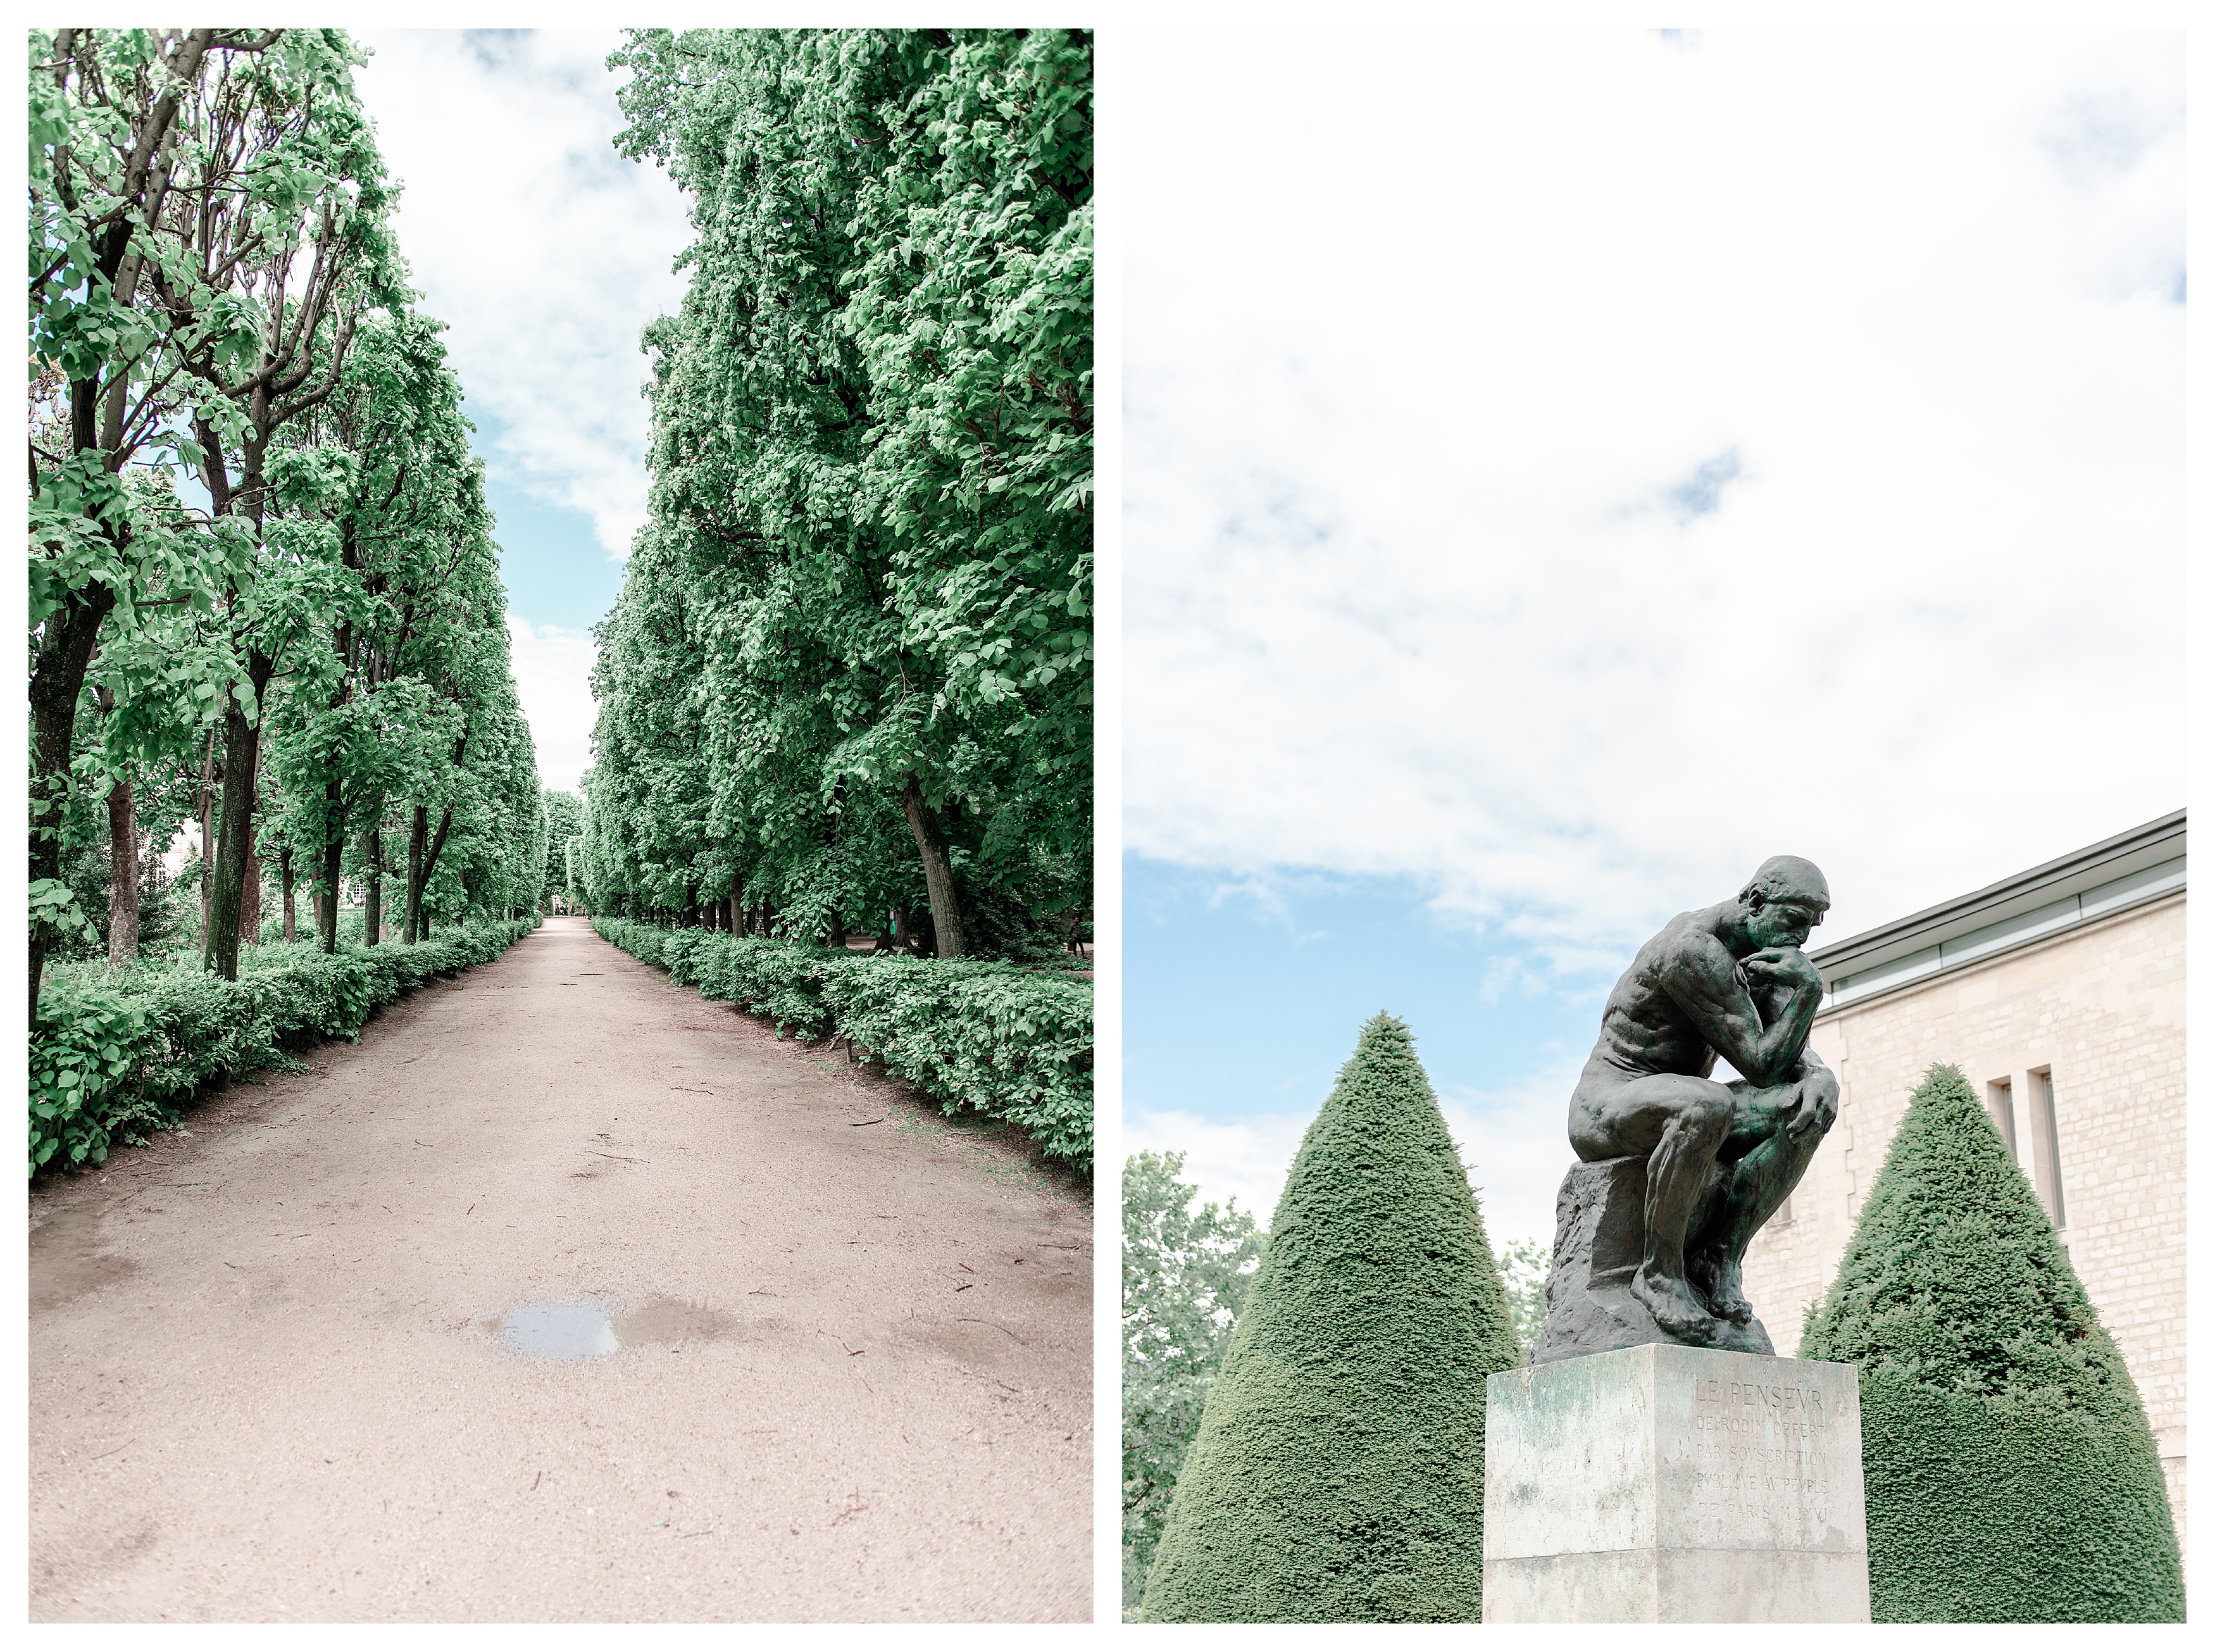 the thinker, known as le penseur, in the gardens of the rodin museum paris